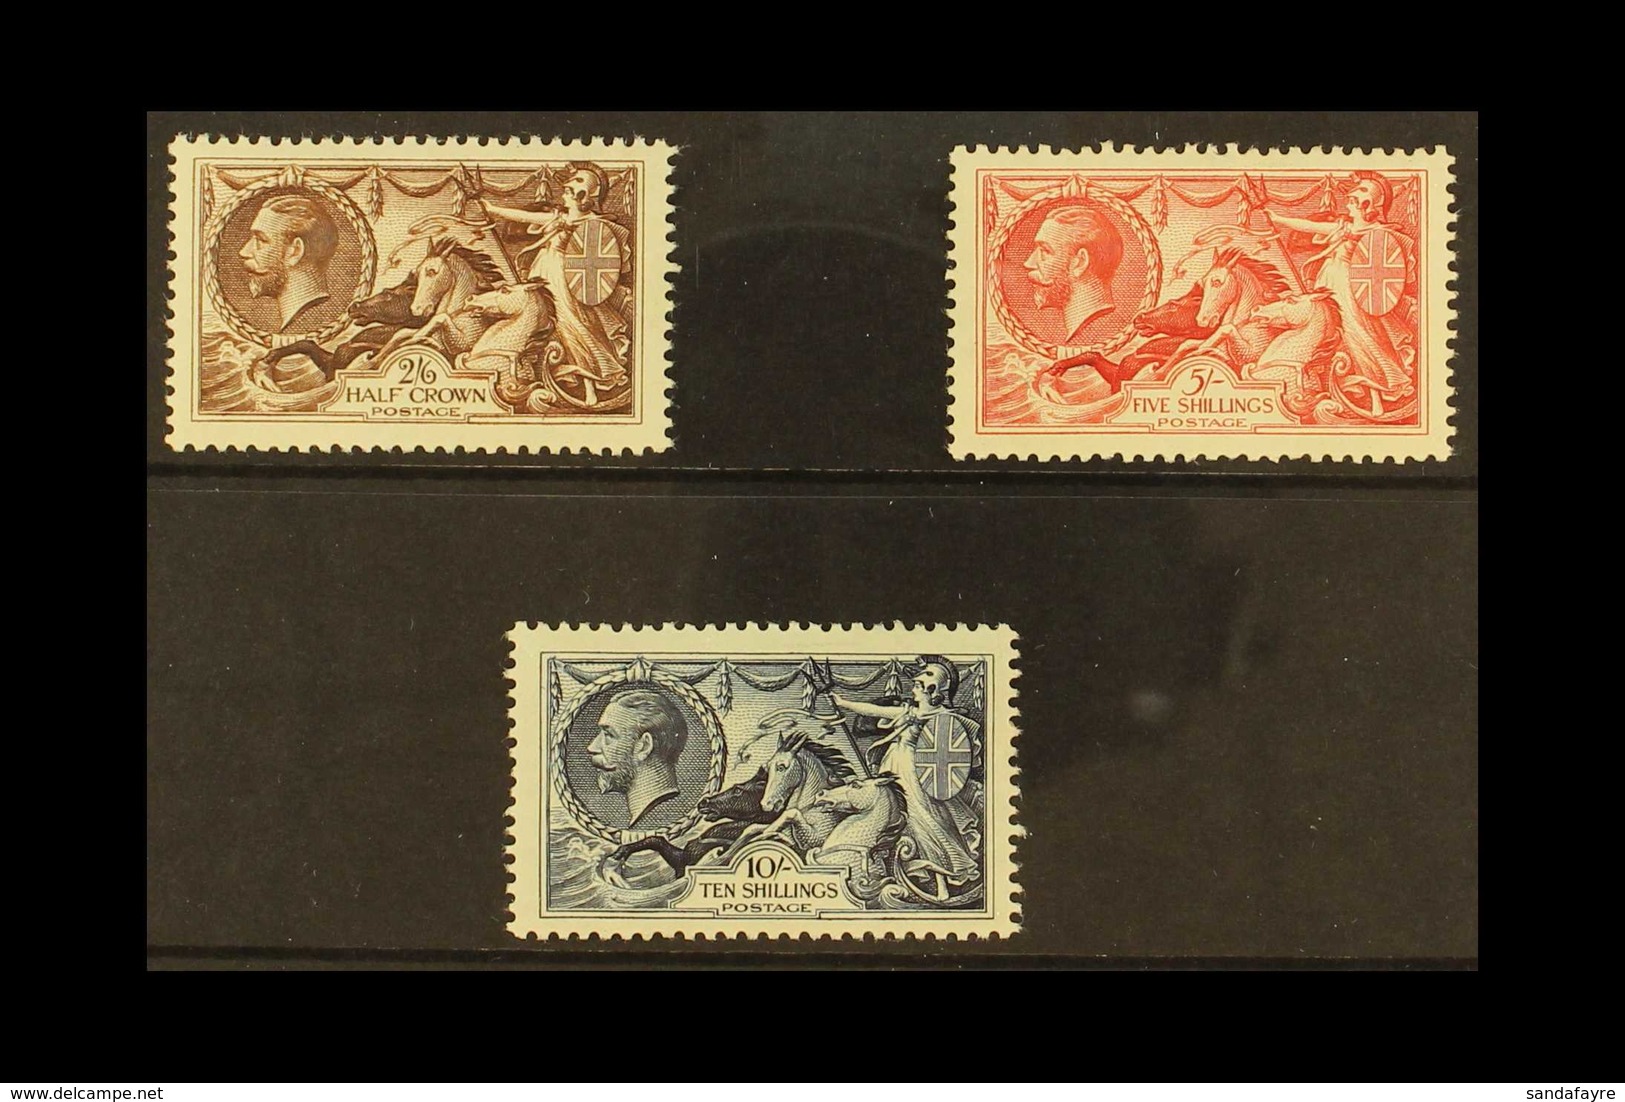 1934 Re-engraved Seahorses Set Complete, SG 450/52, Mint Lightly Hinged. Lovely Quality (3 Stamps) For More Images, Plea - Unclassified